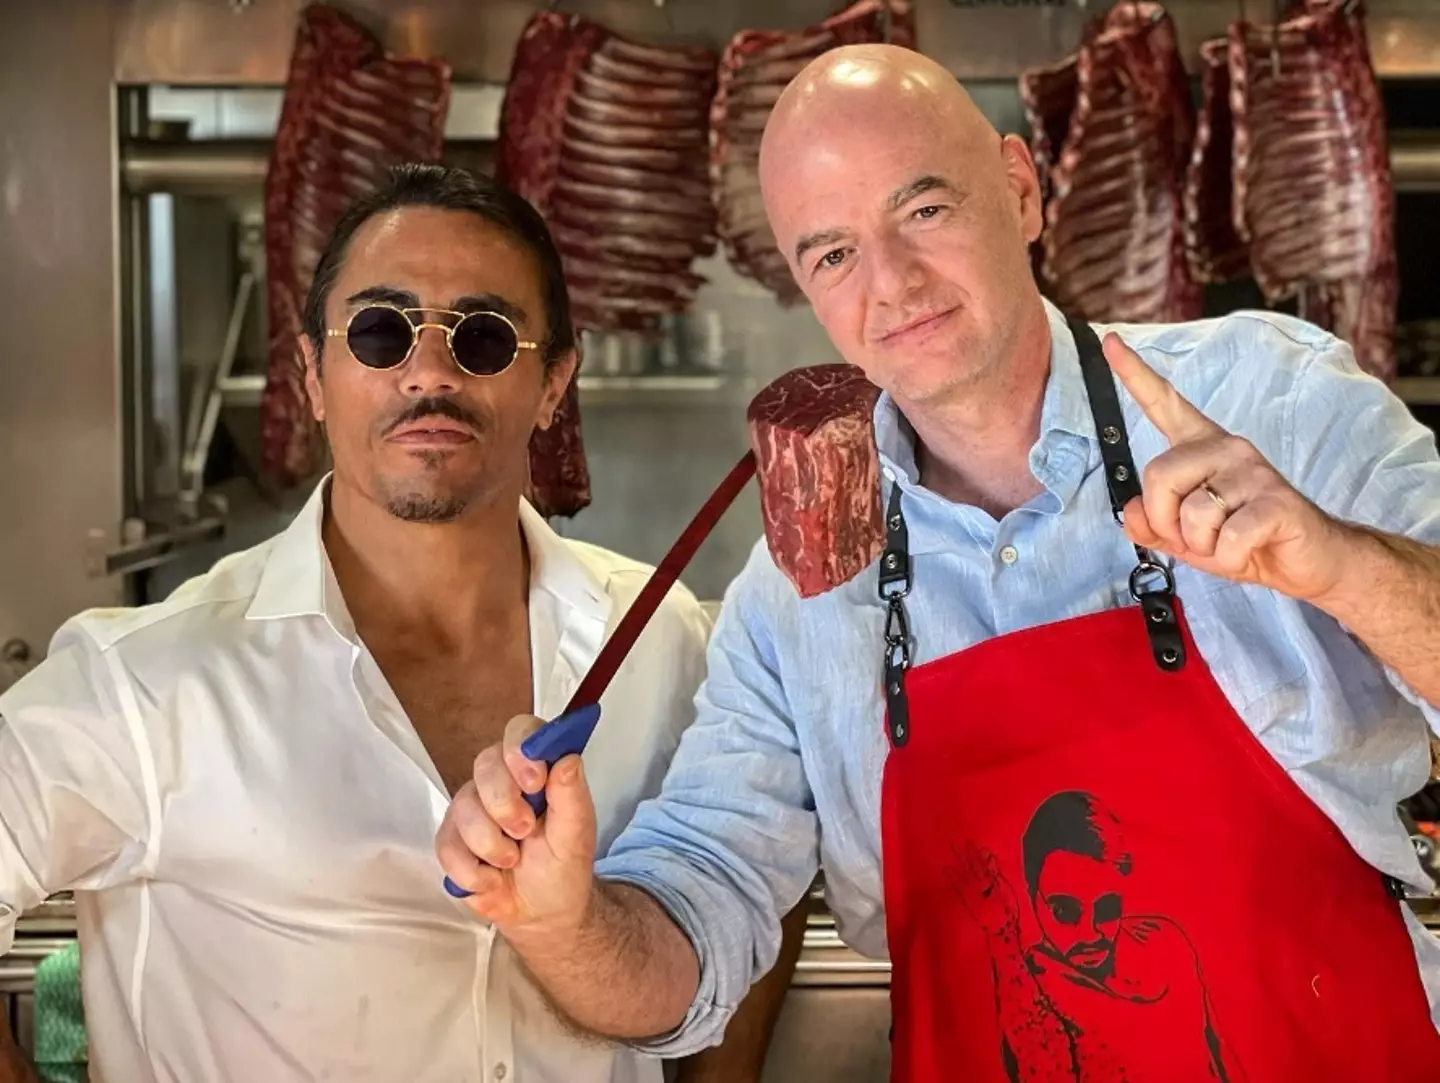 SaltBae and Infantino know each other.